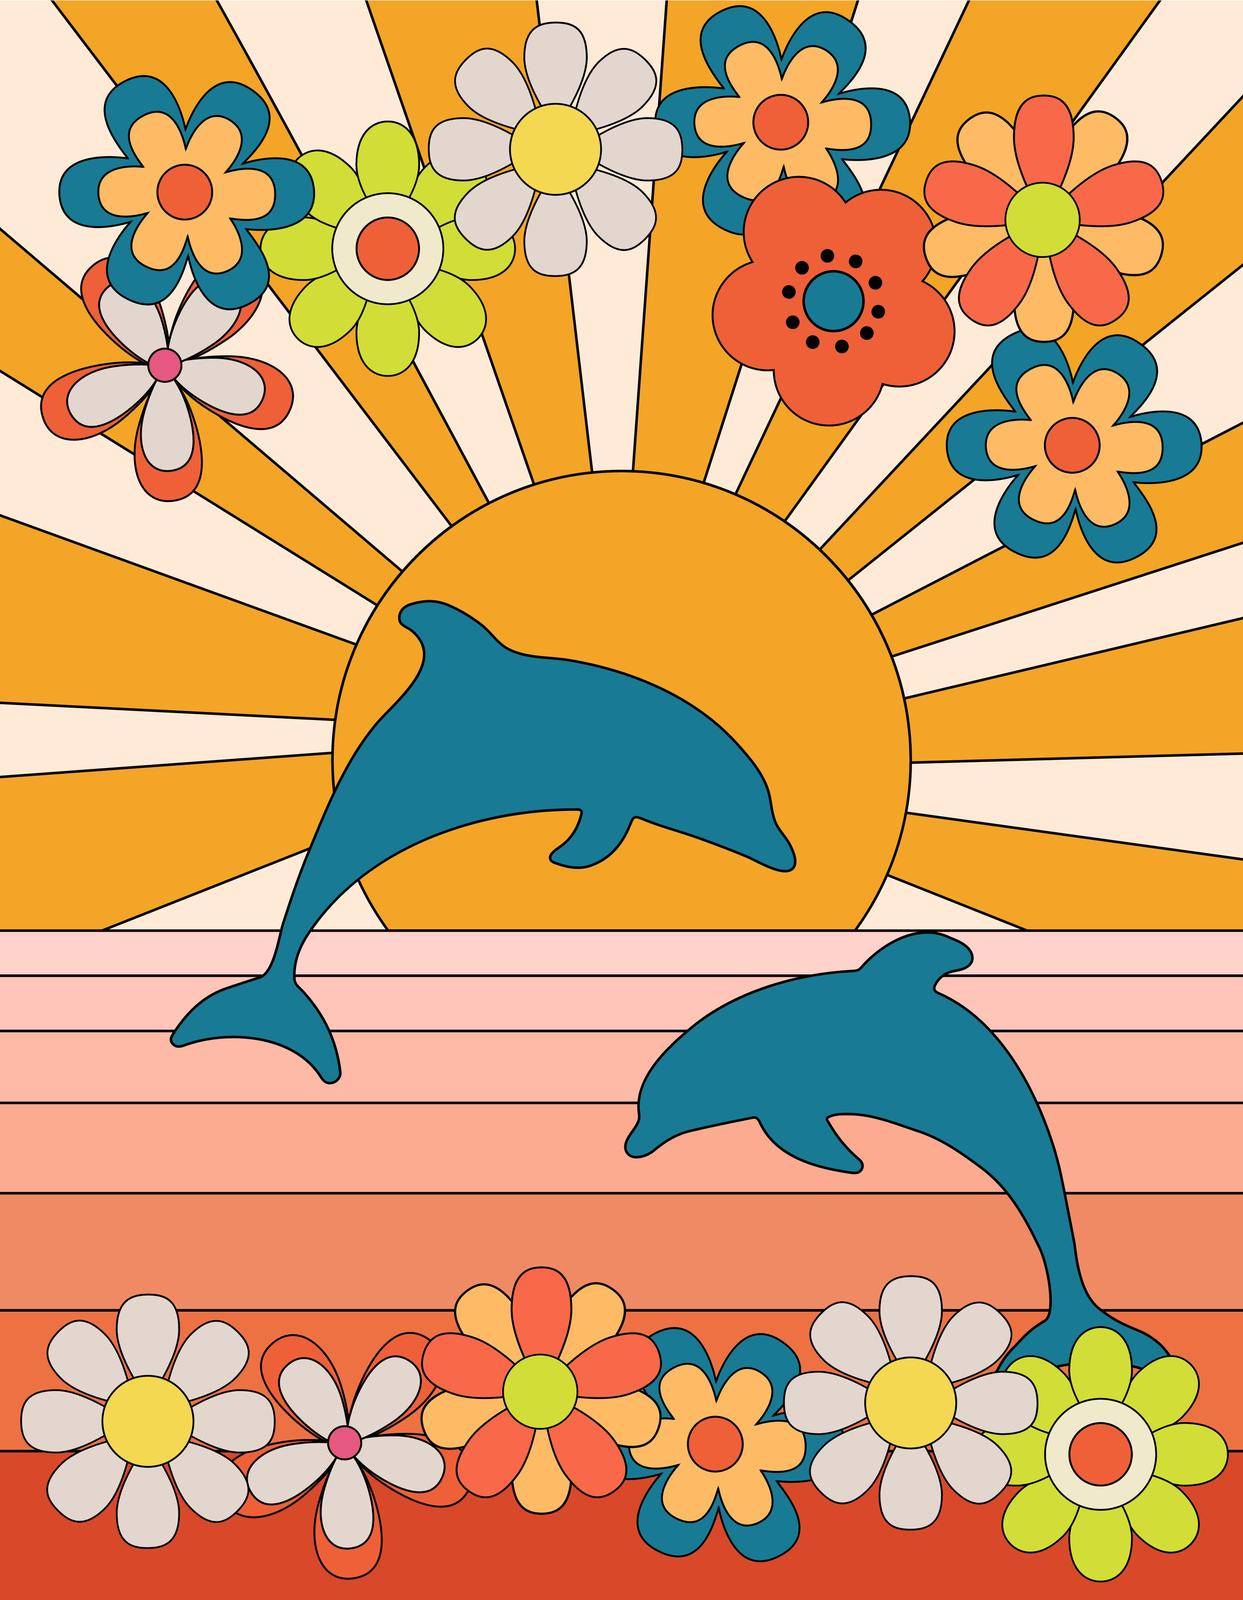 Groovy poster 70s style with sun and dolphins. Retro print with flowers daisy. Vector illustration with sunshine and sea by ElenaPlatova